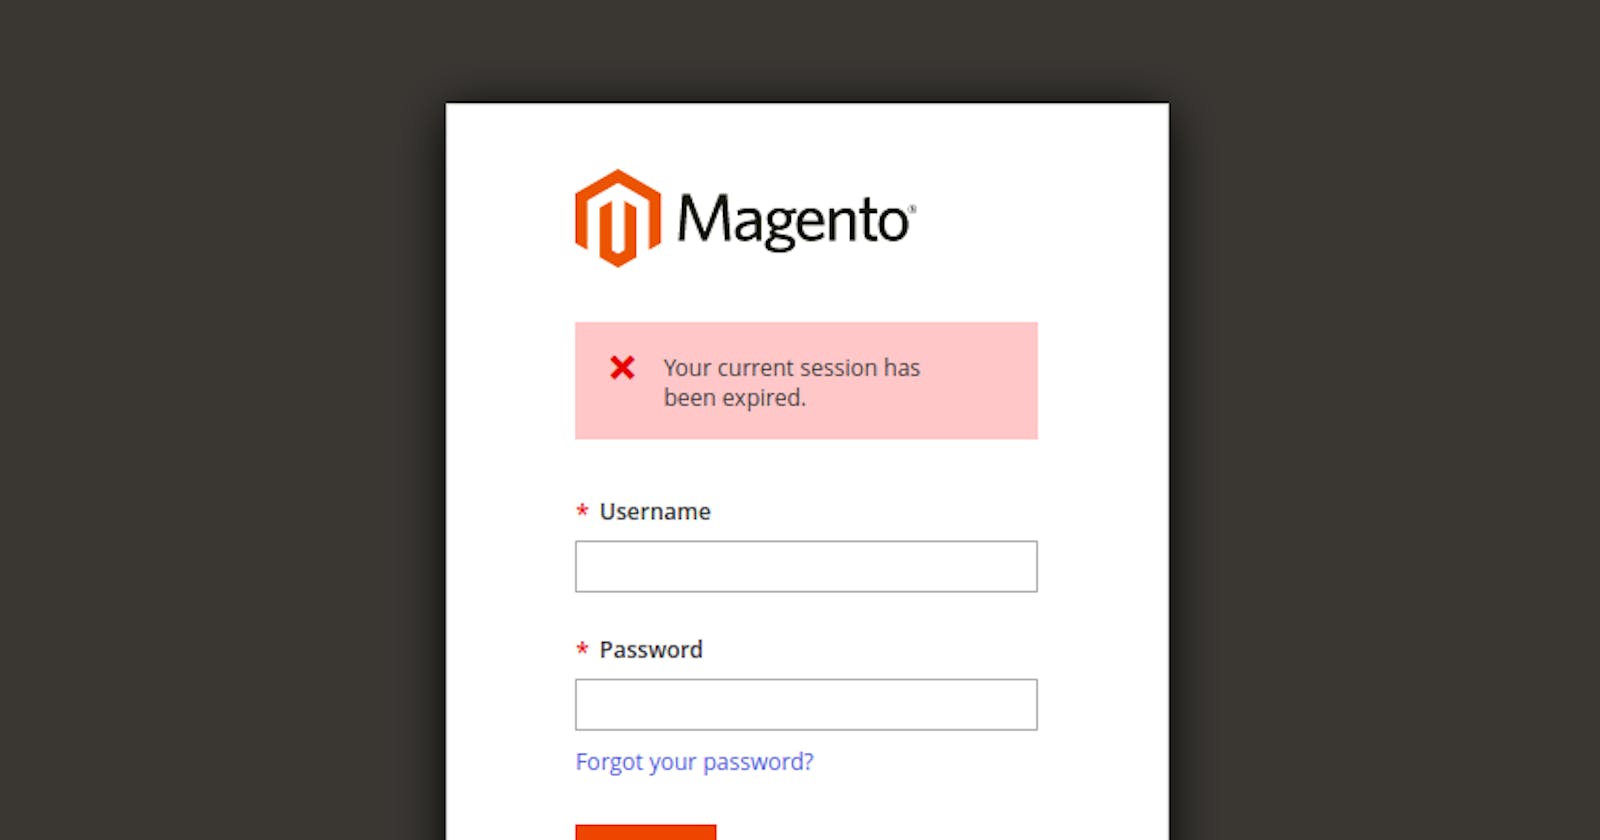 Magento 2 - Your Current Session Has Been Expired on Sign in.